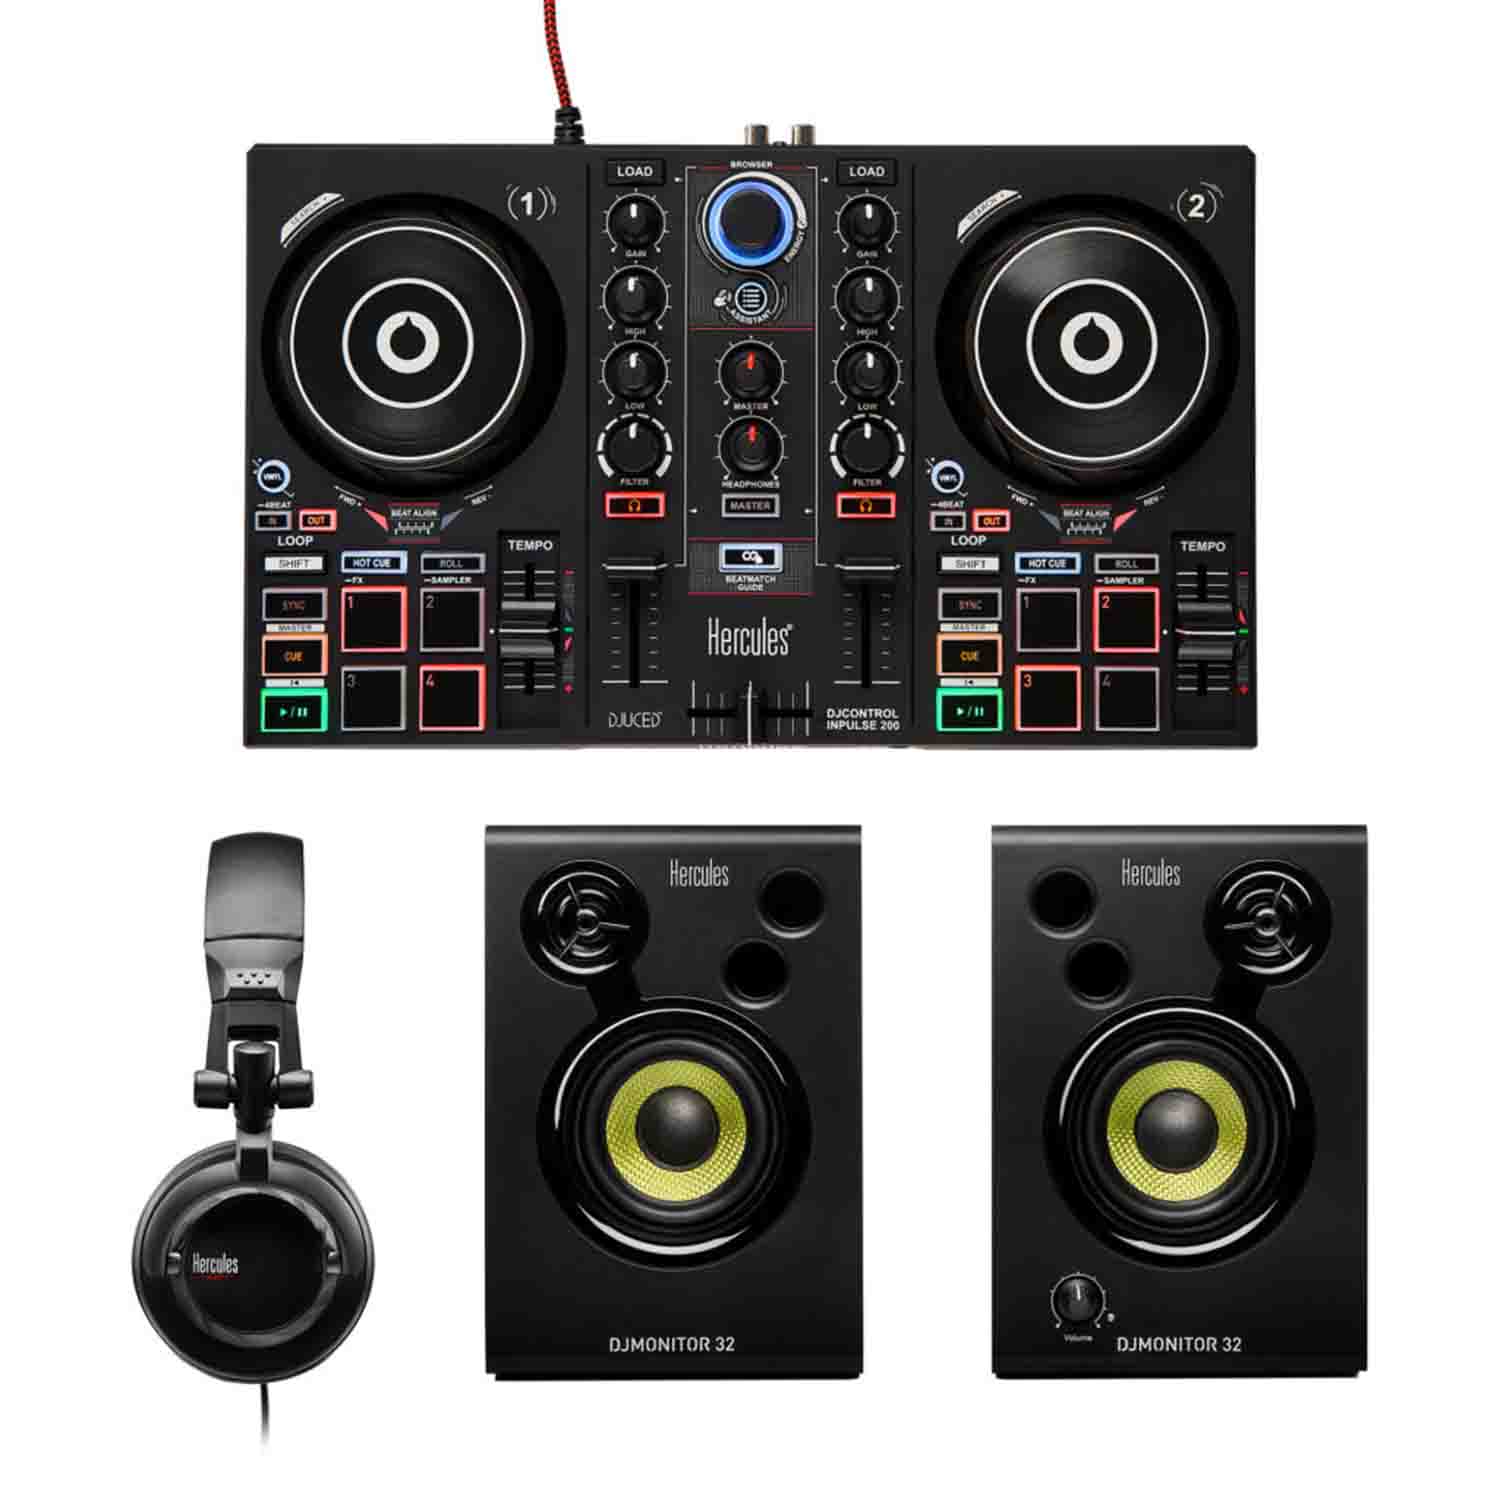 Hercules DJLearning Kit Complete DJ System for Beginners - Hollywood DJ